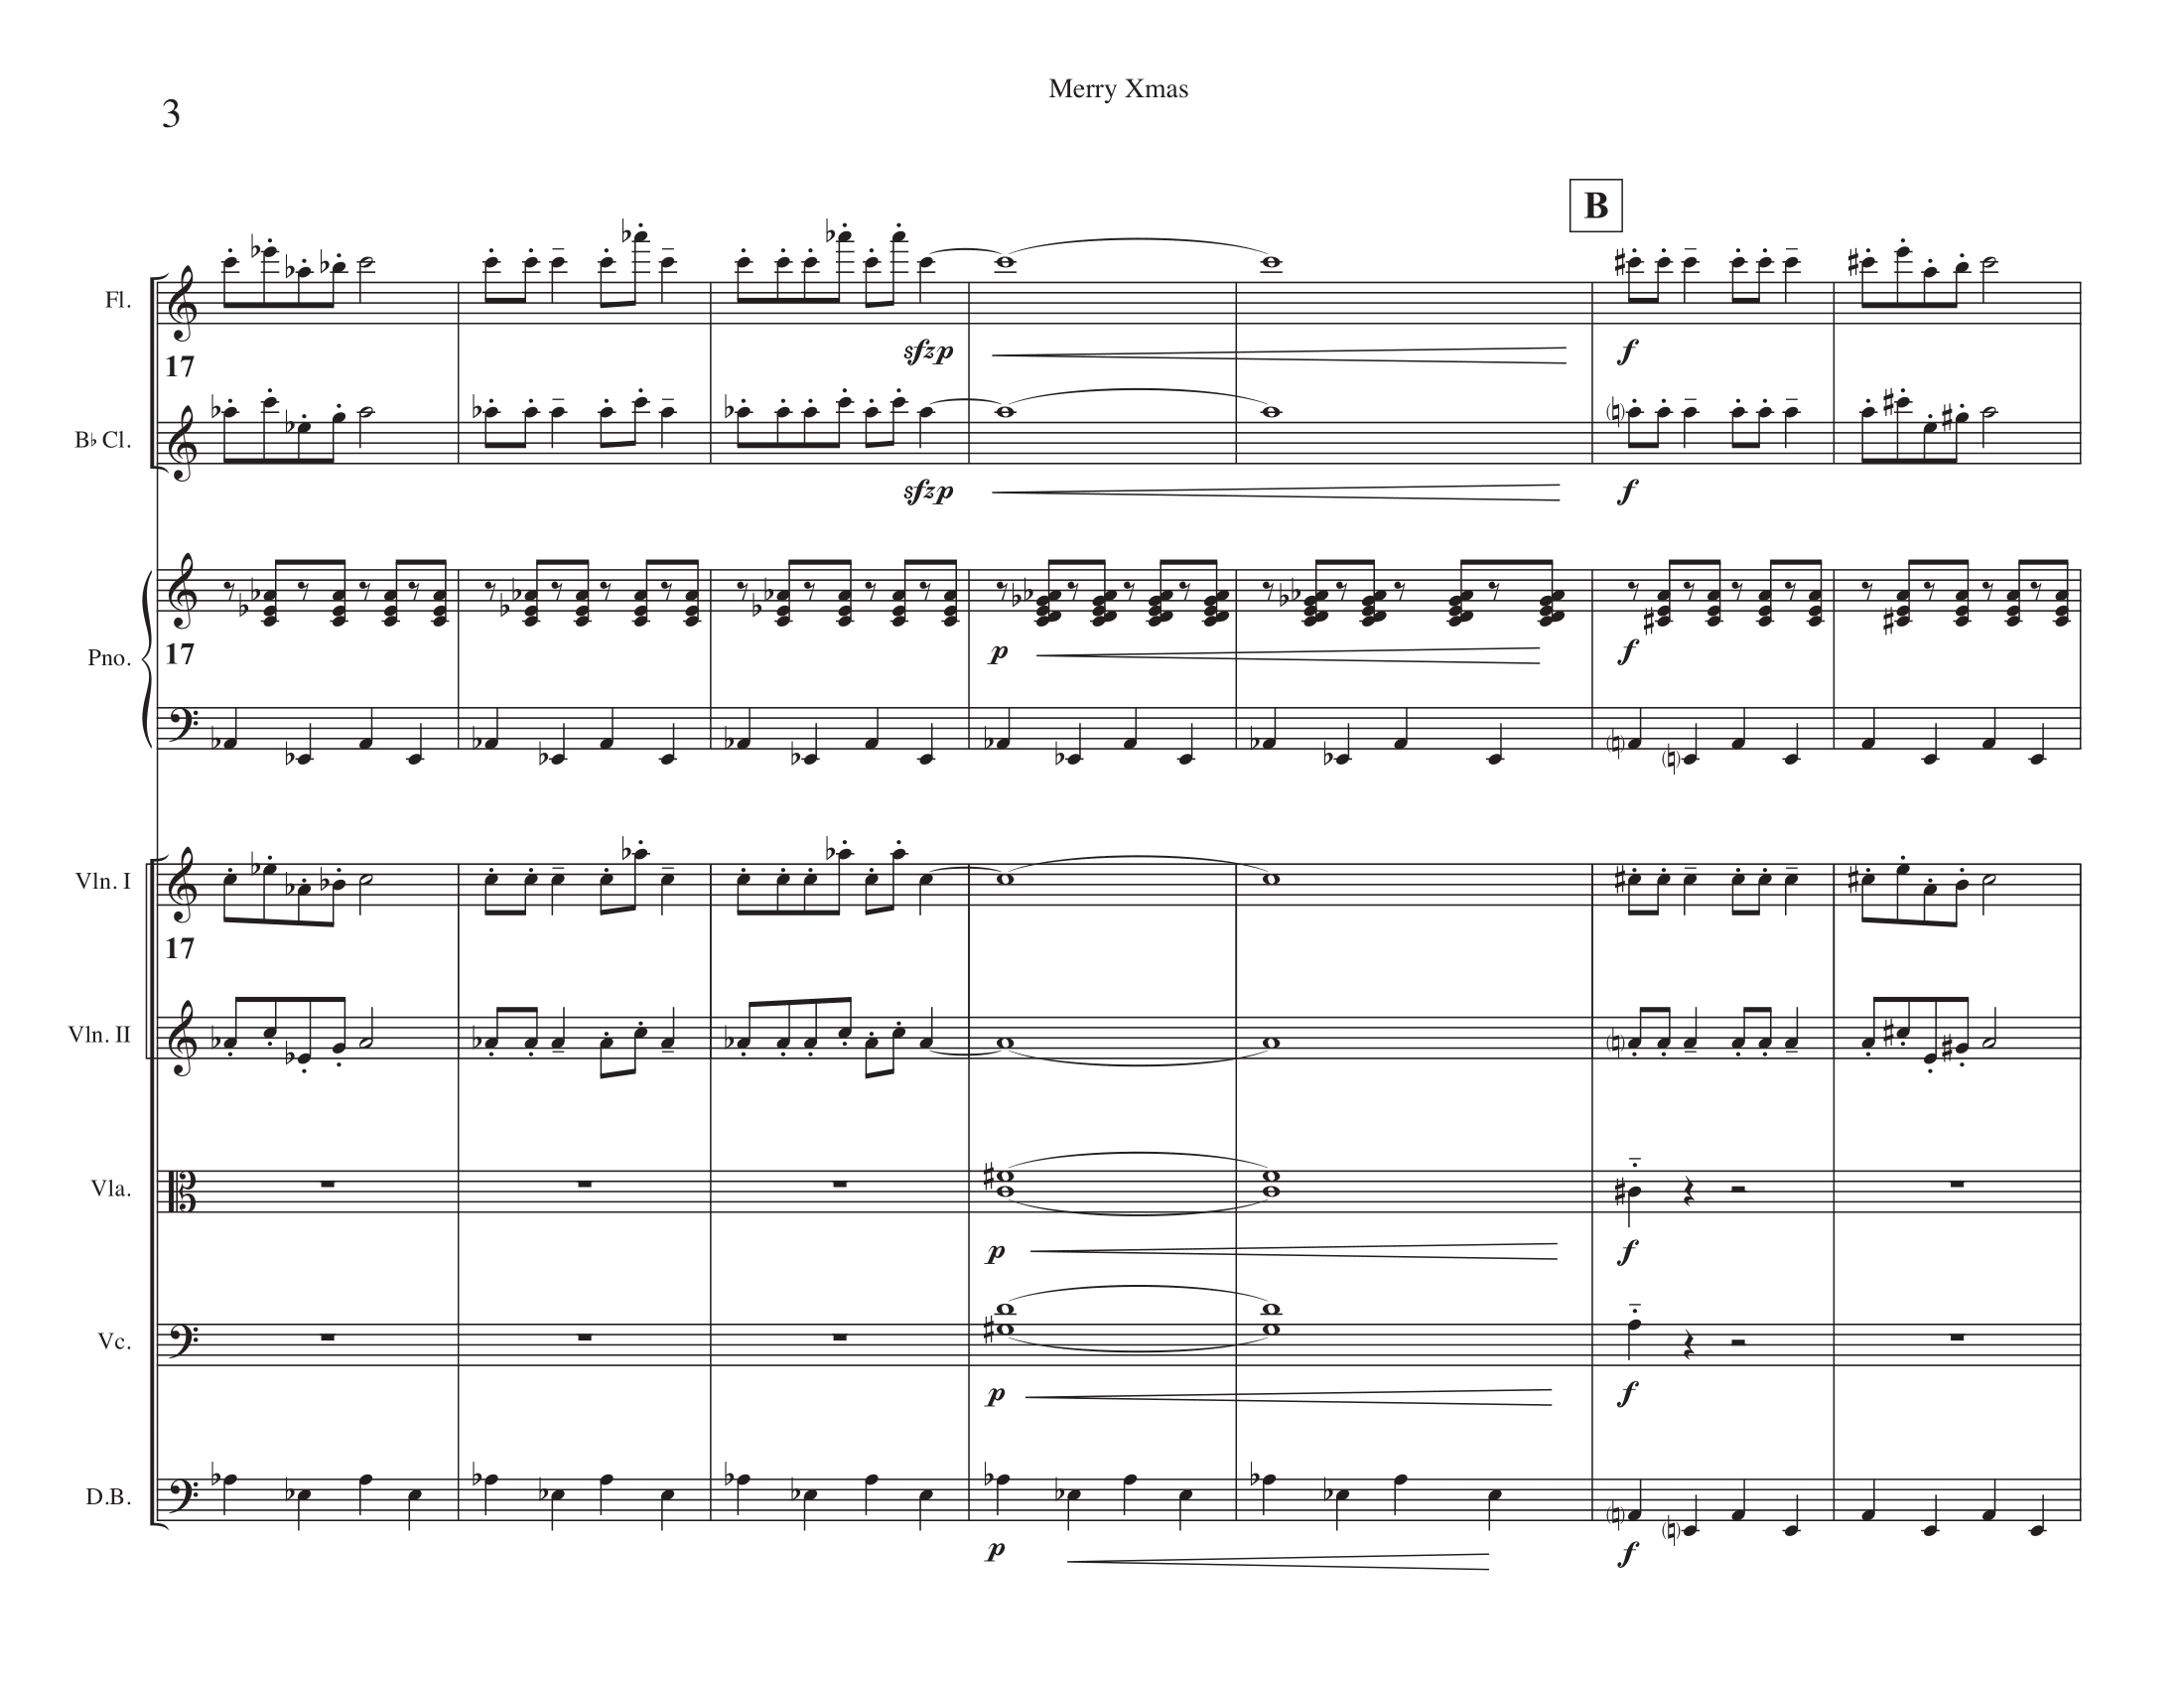 Merry Xmas Score v11 - Concert Score (dragged)-3.png